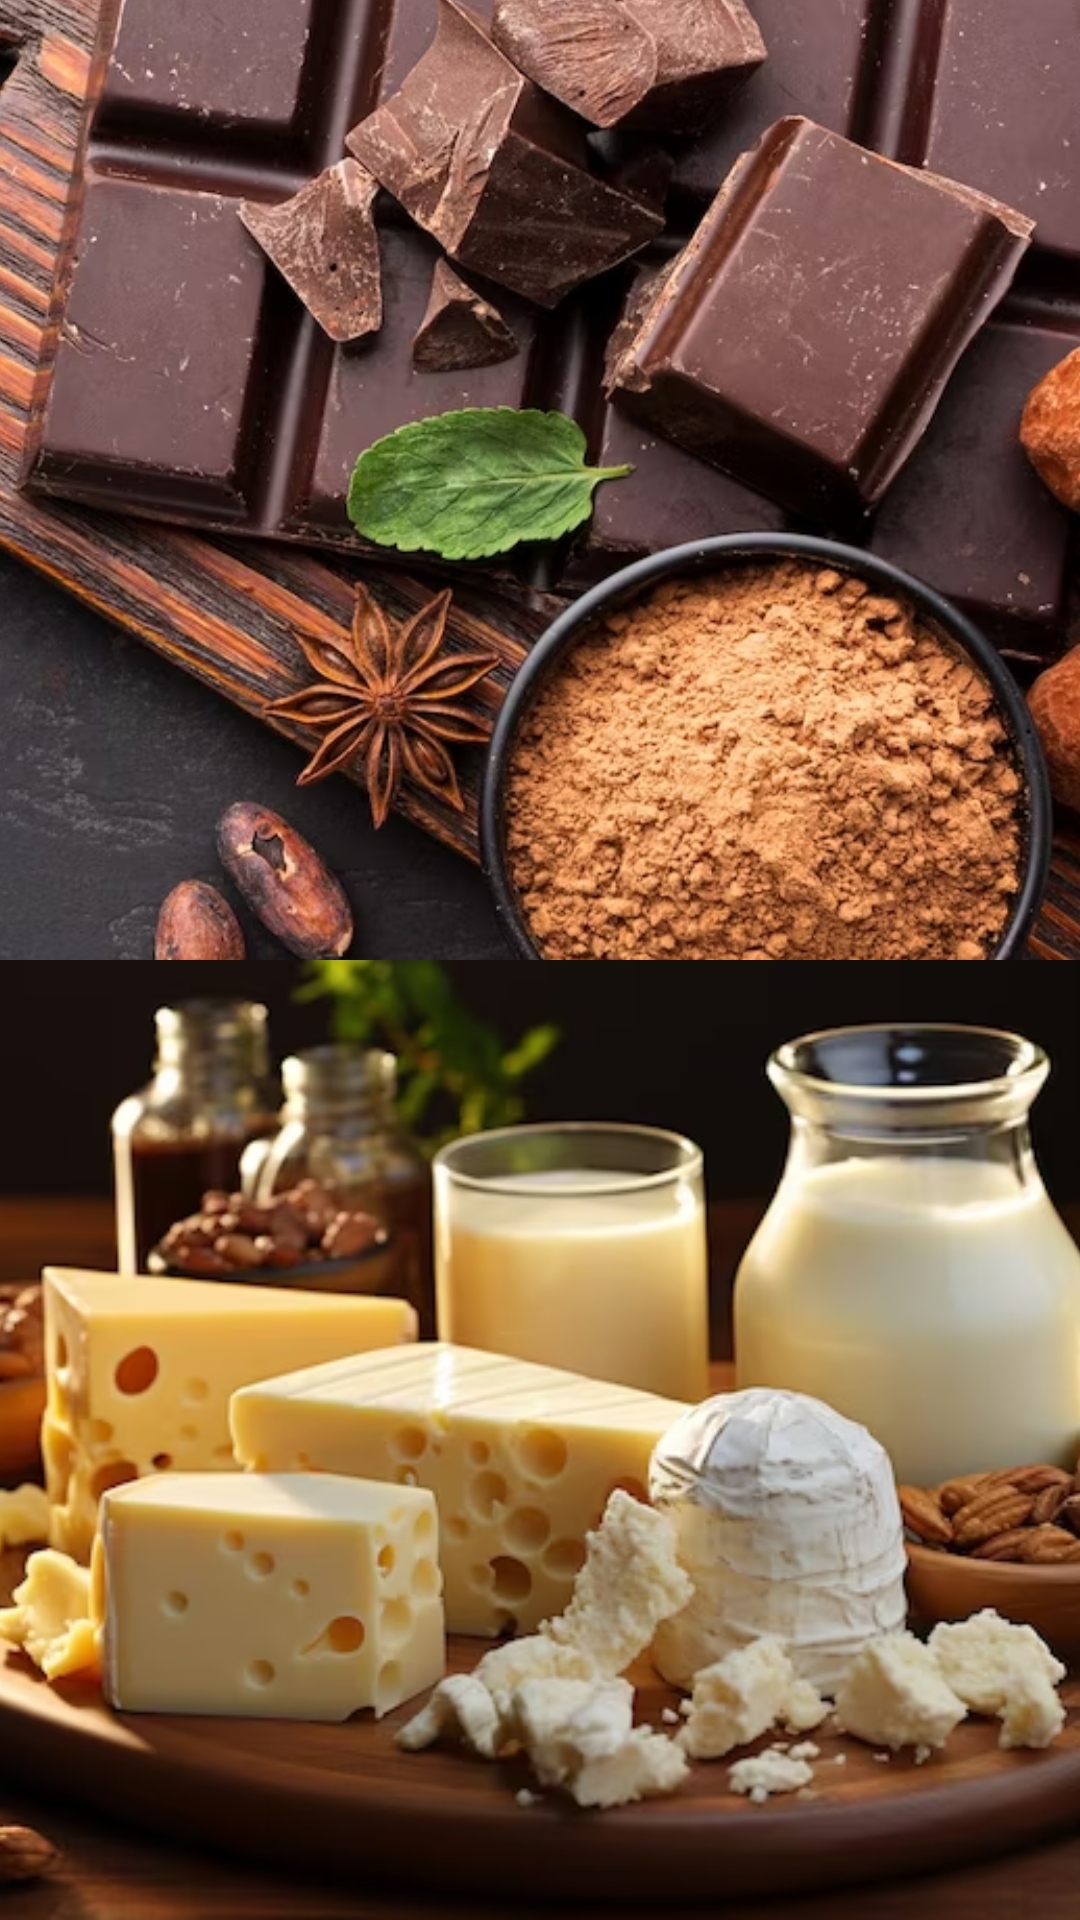 Dark Chocolate to Cheese: High-fat foods which are incredibly nutritious